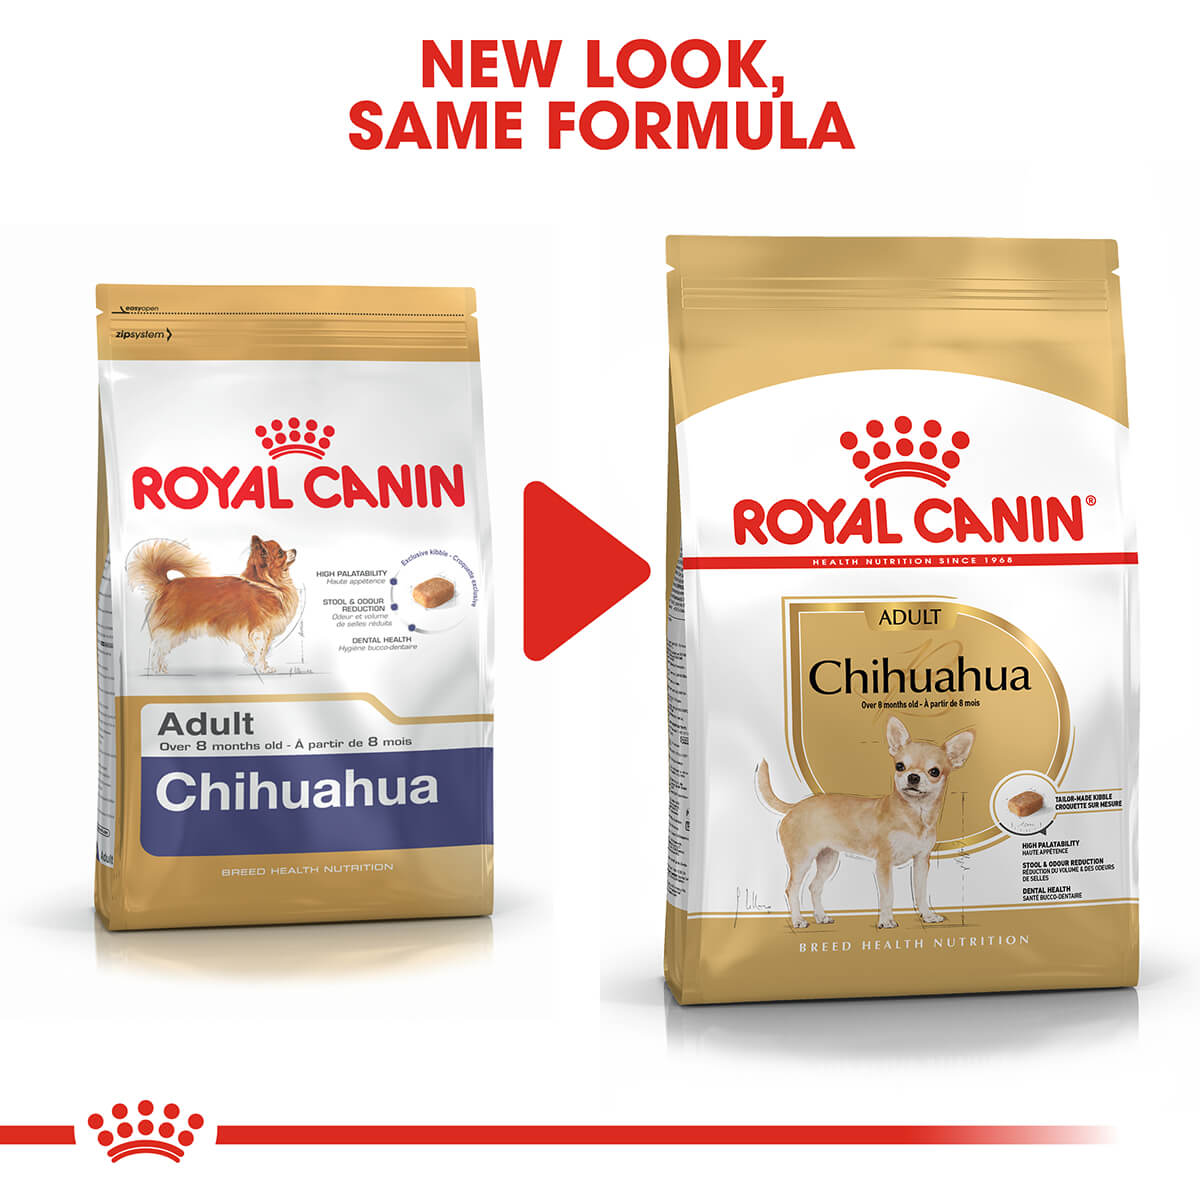 Royal Canin Chihuahua Adult Dry Dog Food 1.5kg (122725000054) [default_color]